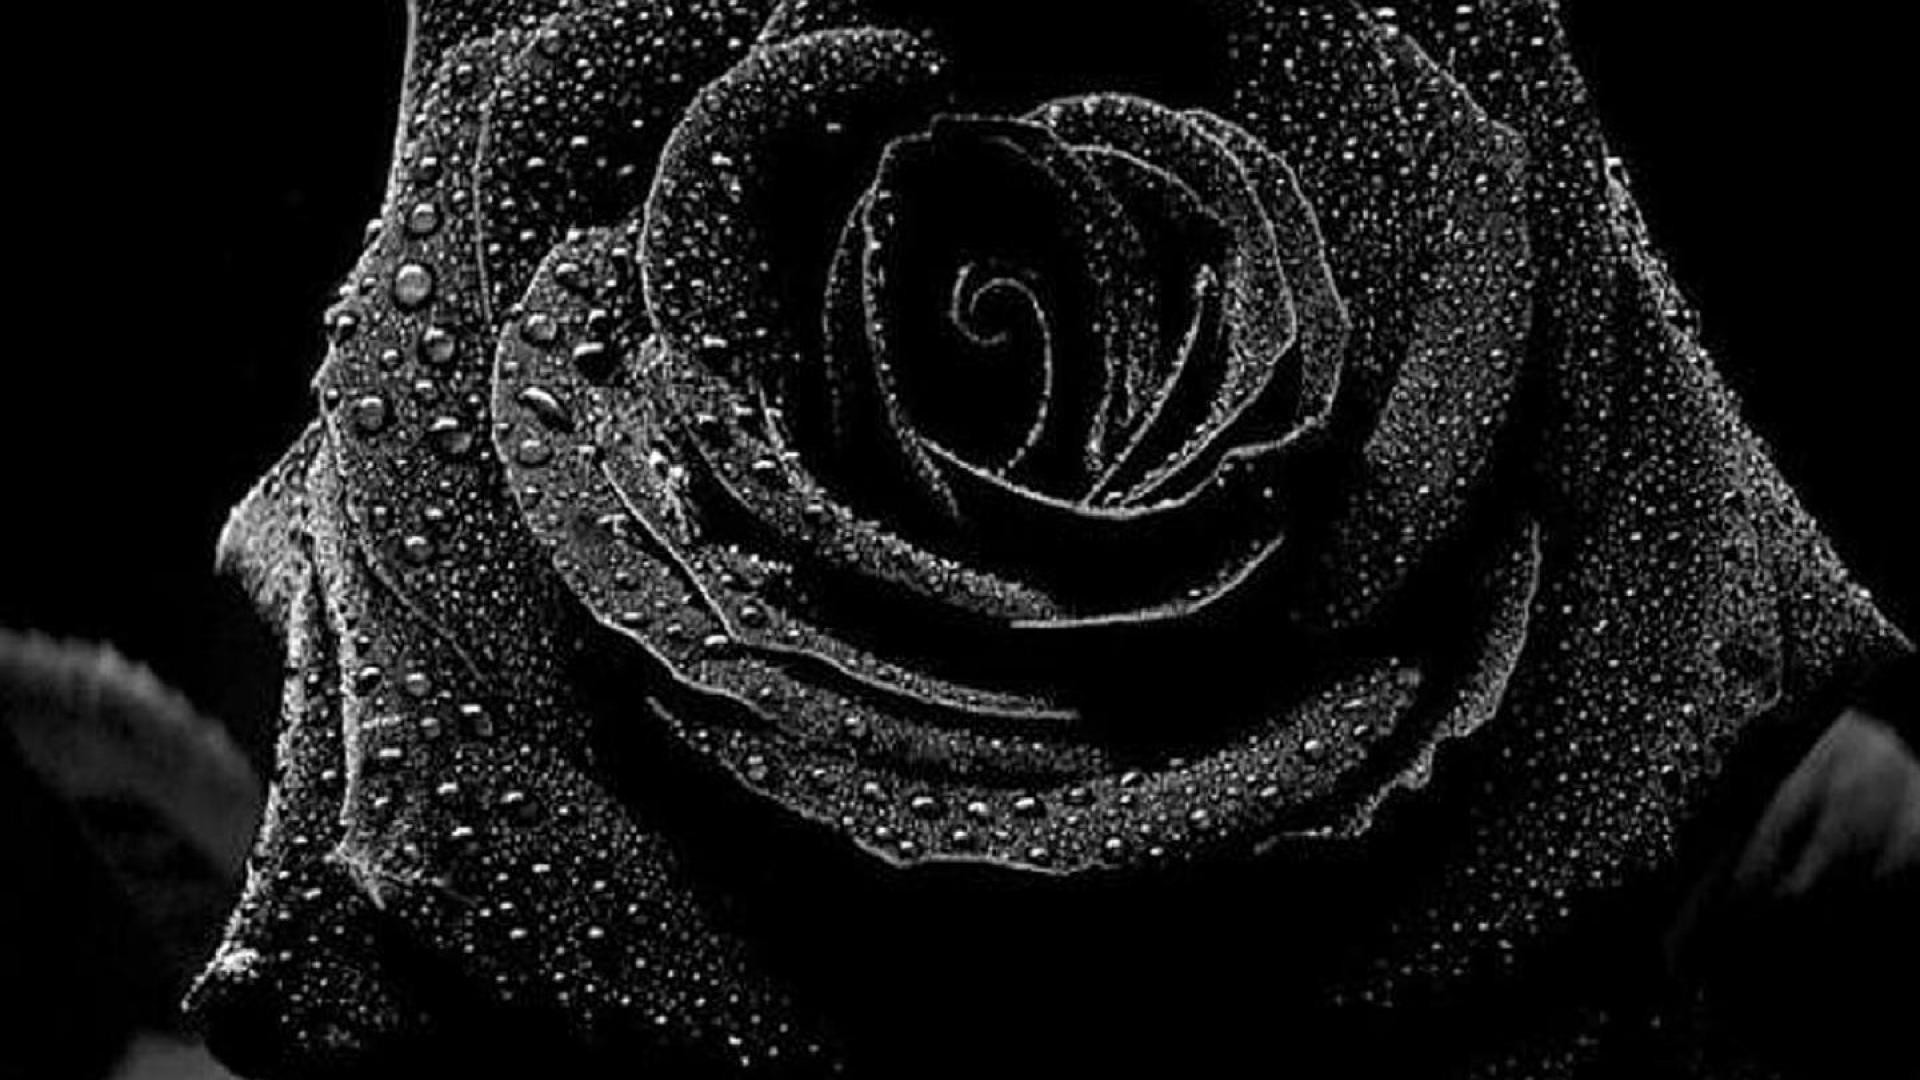 1920x1080 Wallpapers For > 3d Rose Live Wallpaper | wallpapers,themes,ect. |  Pinterest | Rose wallpaper and Wallpaper